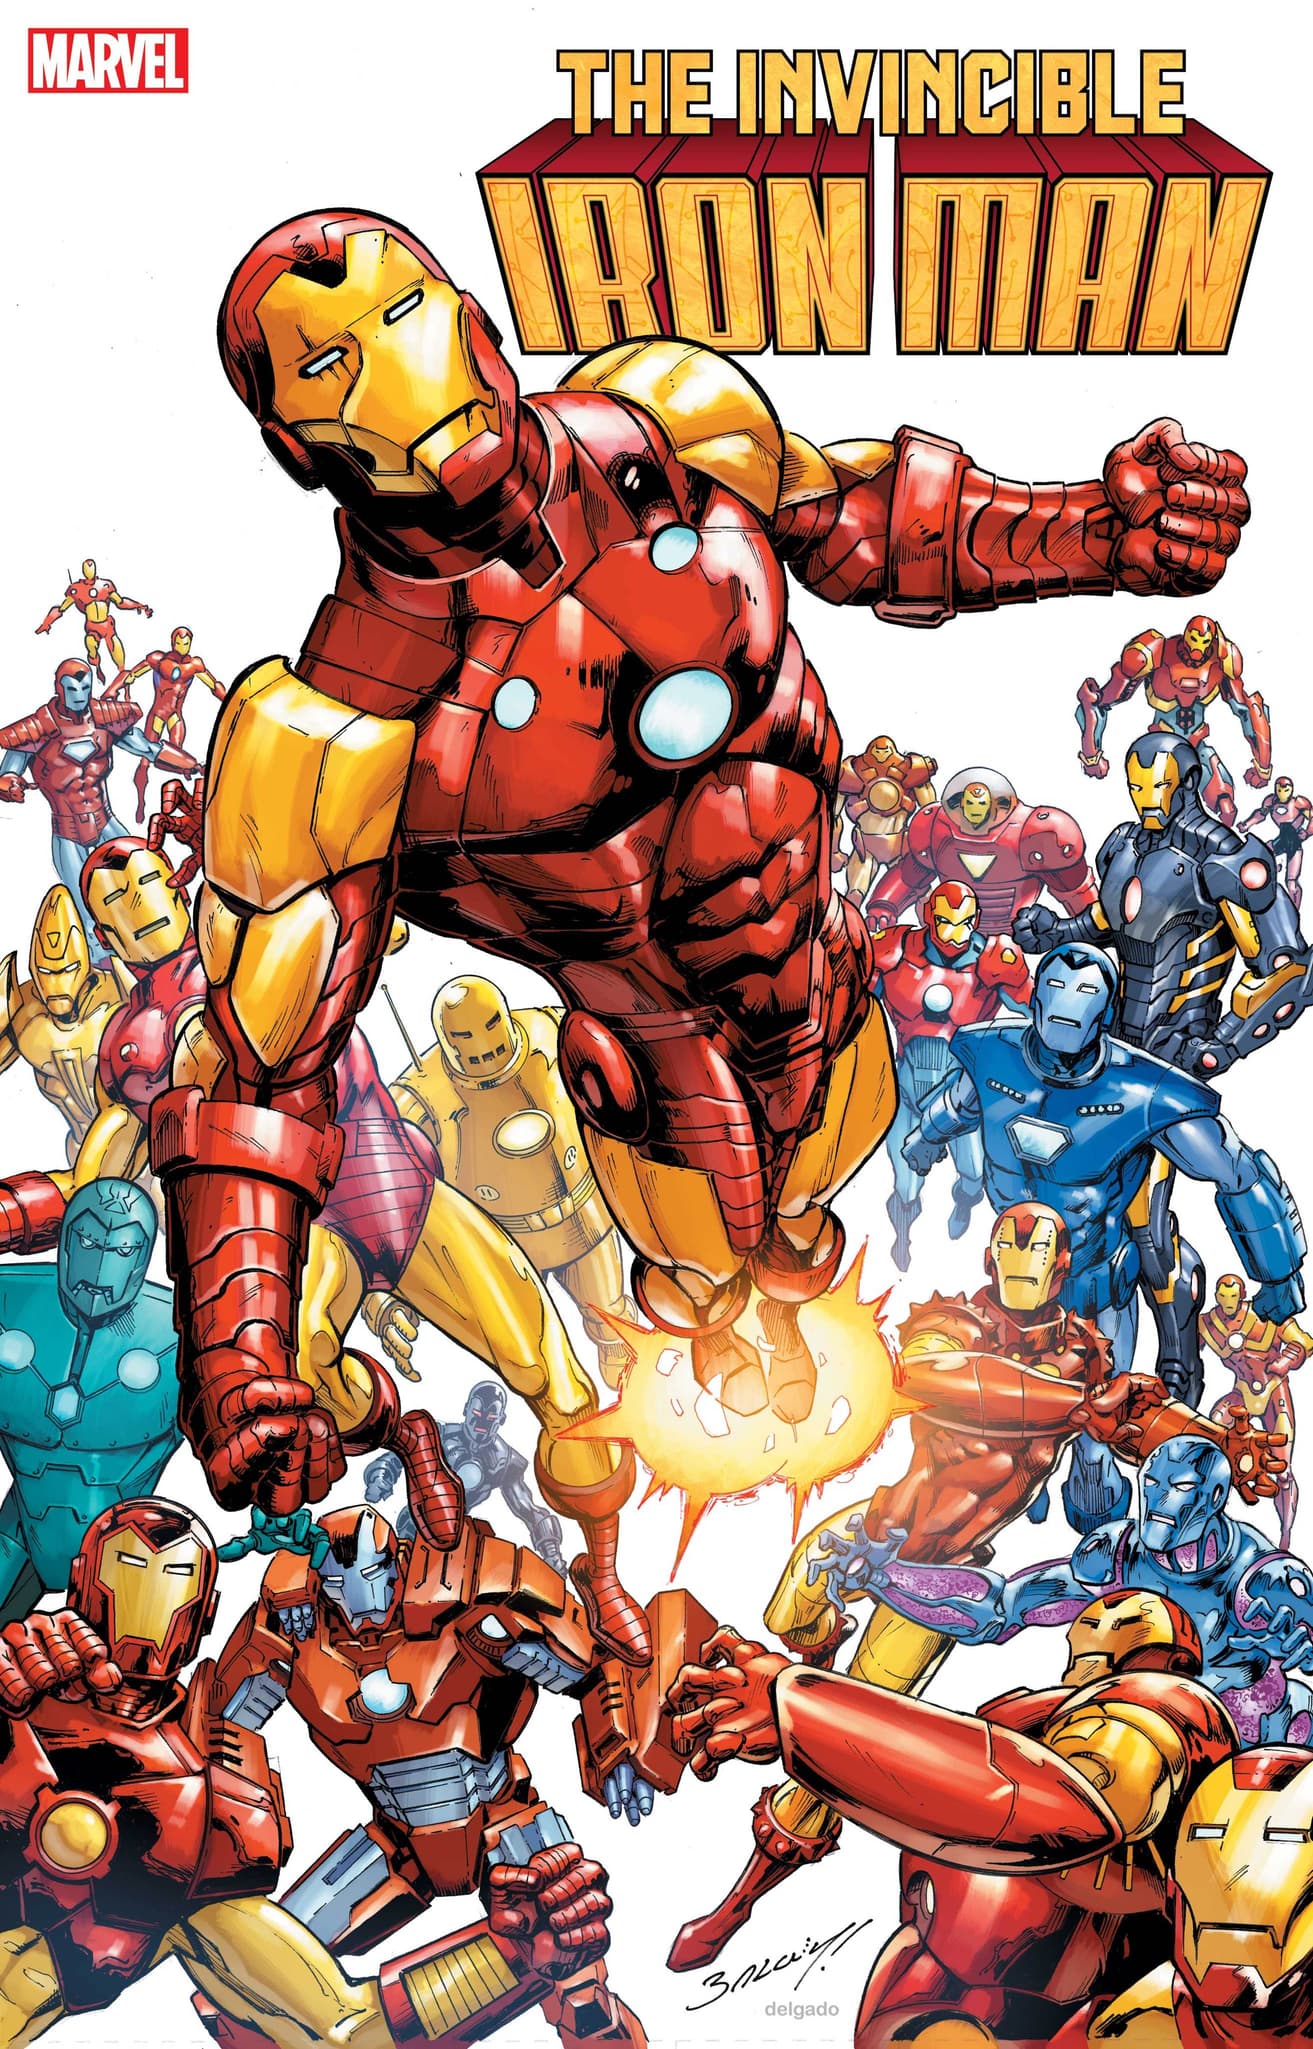 INVINCIBLE IRON MAN #1 Second Printing Variant Cover by Mark Bagley